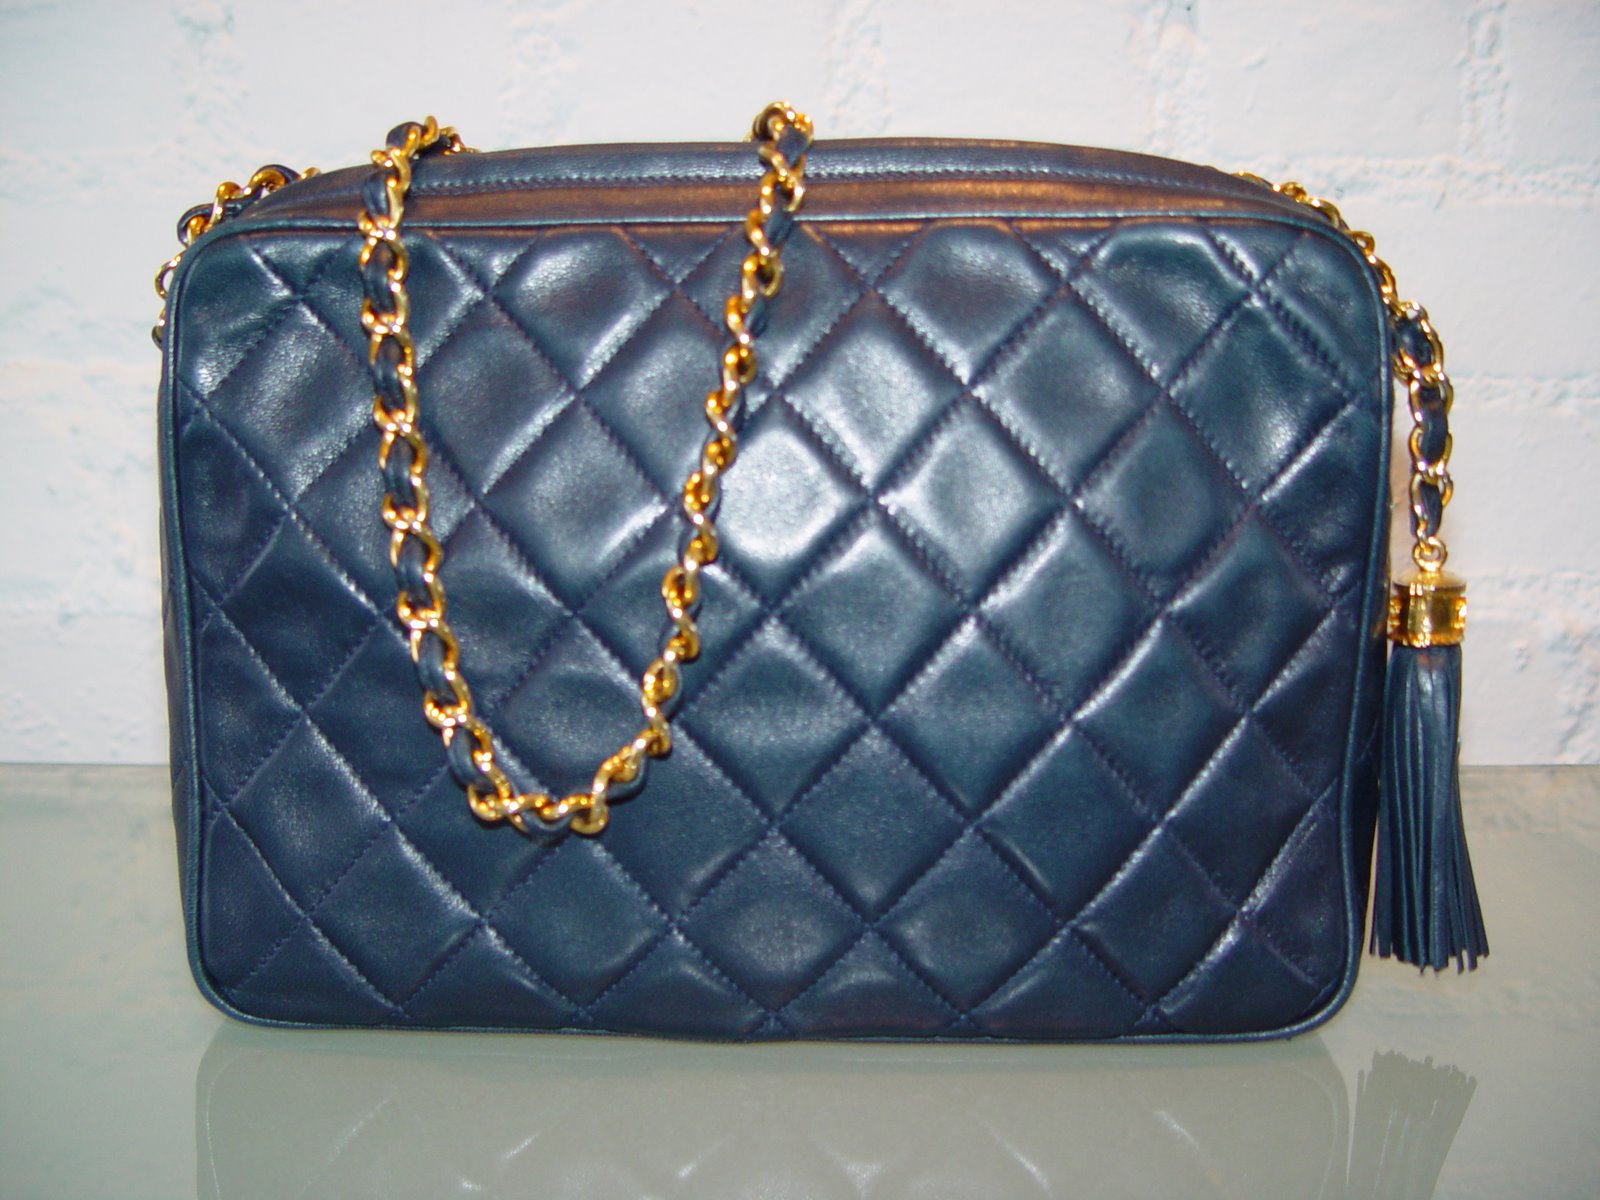 [CHANEL+CLASSIC+QUILTED+BLUE+LEATHER+SHOULDER+BAG+9+X+6+HALF+X+3+C+LATE+1980S.JPG.JPG]